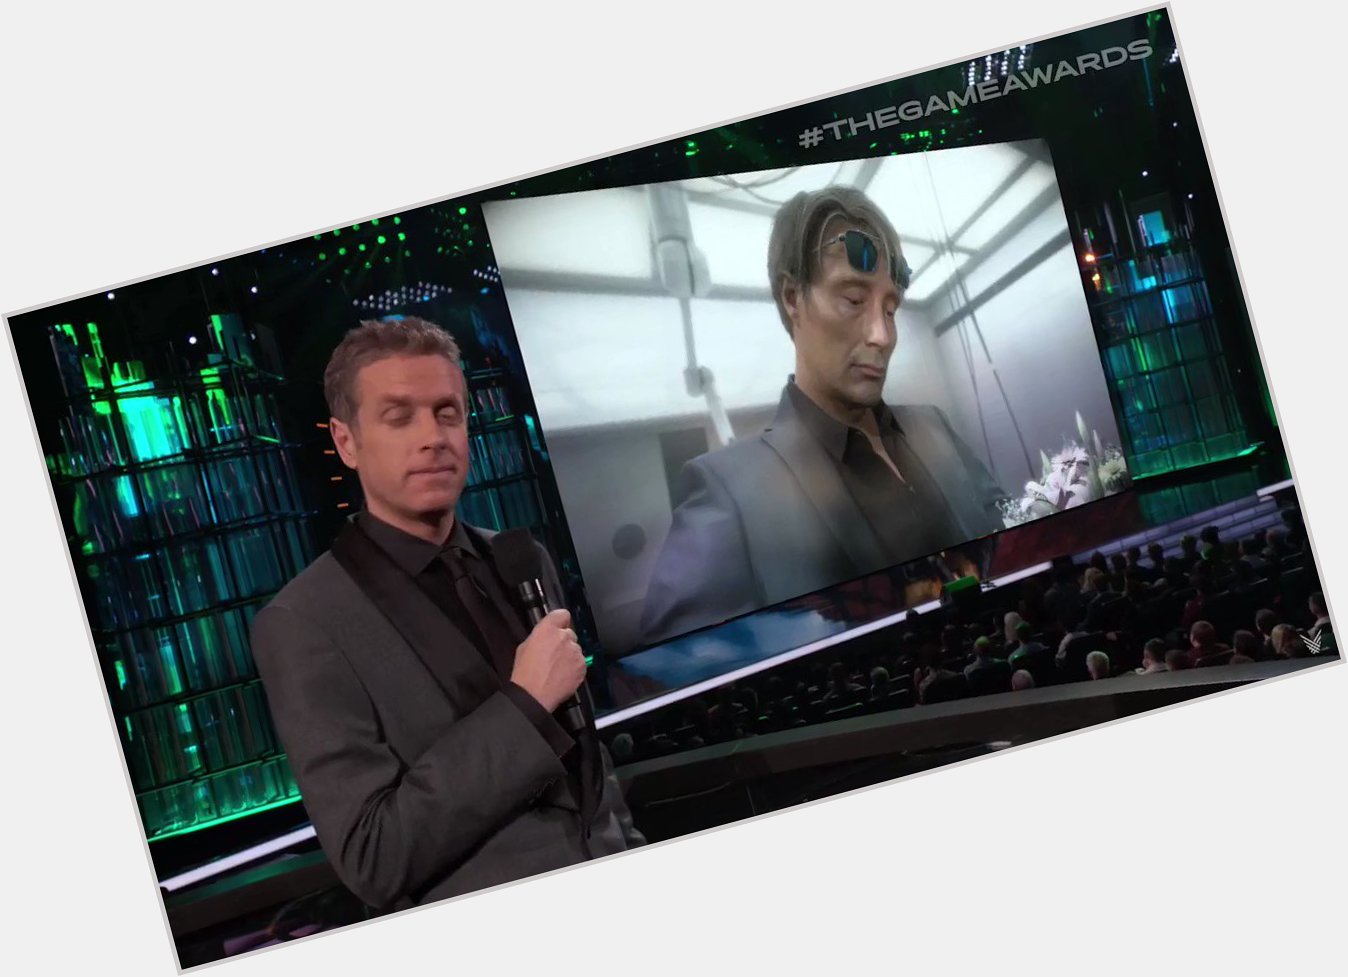 Mads Mikkelsen wishes Geoff Keighley a happy birthday at The Game Awards 2019
Full video:  